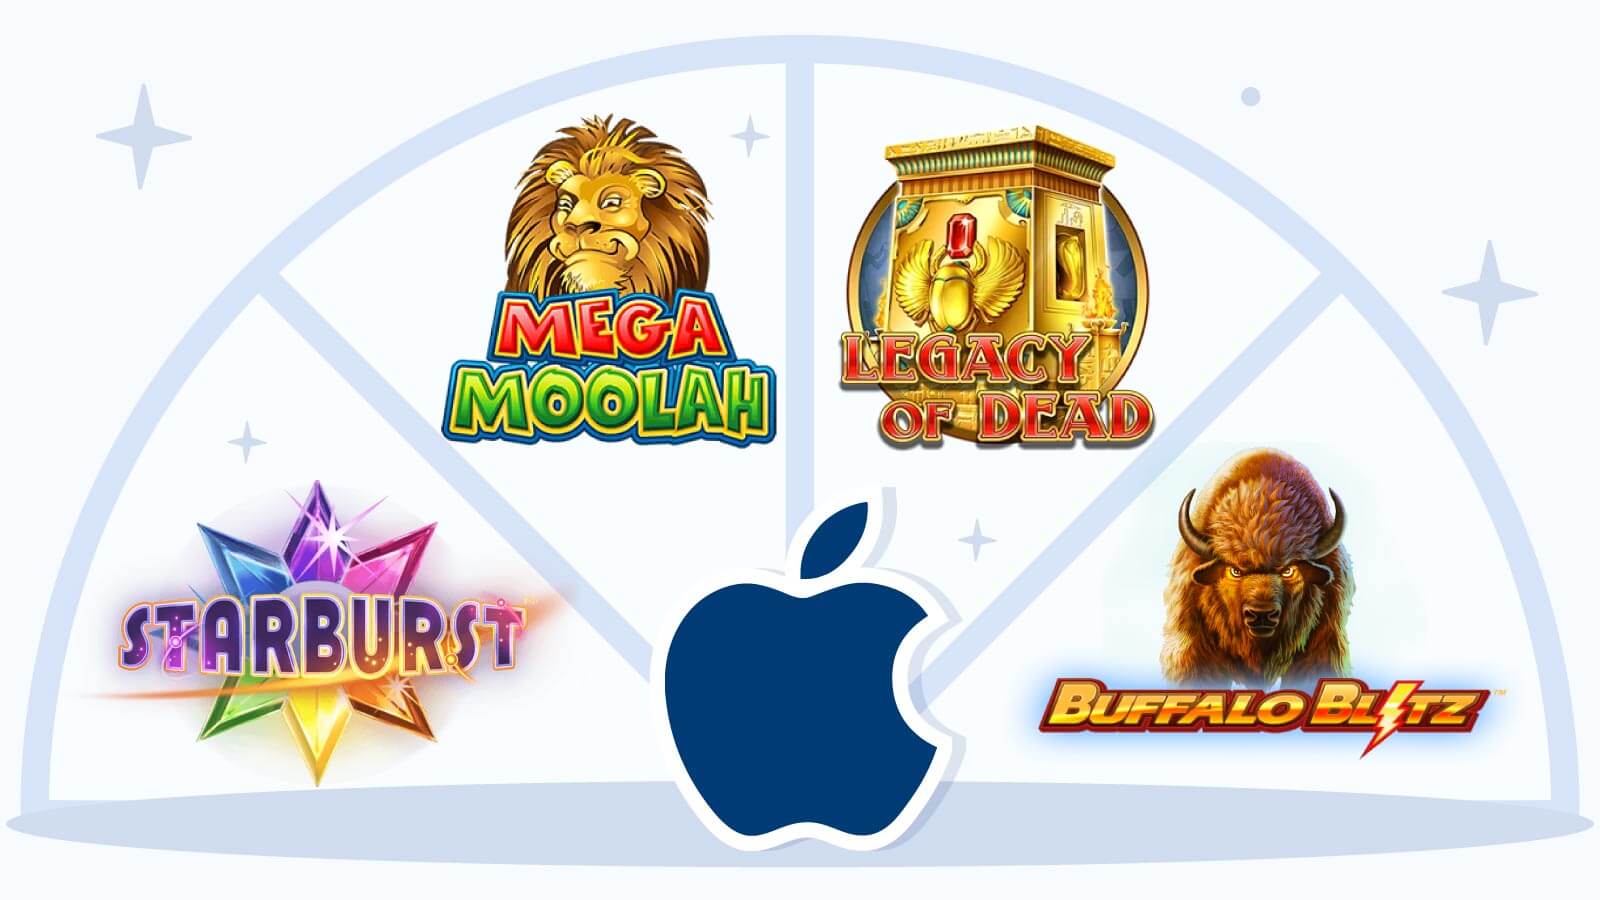 Top Tier Slots and Online Casino Games Optimized for iPhone